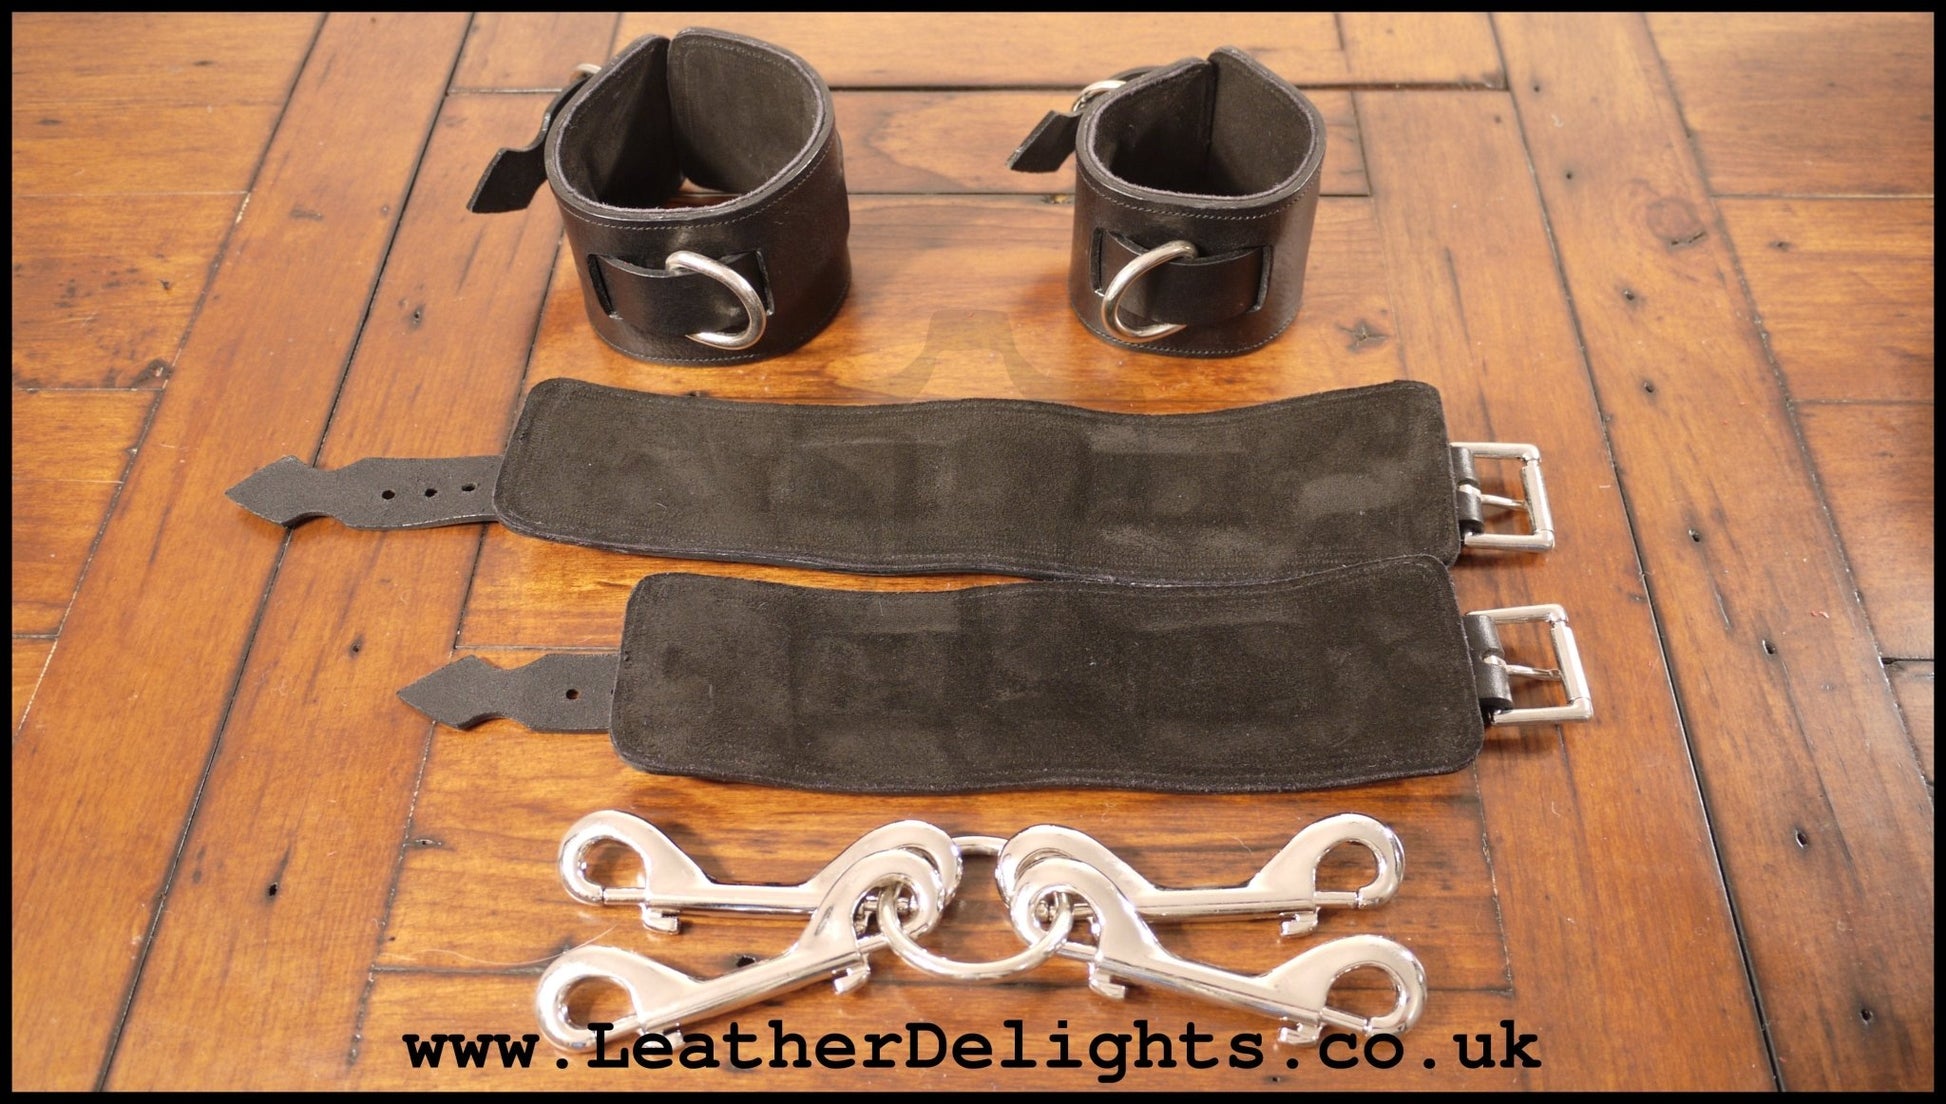 Black Wrist & Ankle Cuffs with Suede Lining - Leather Delights